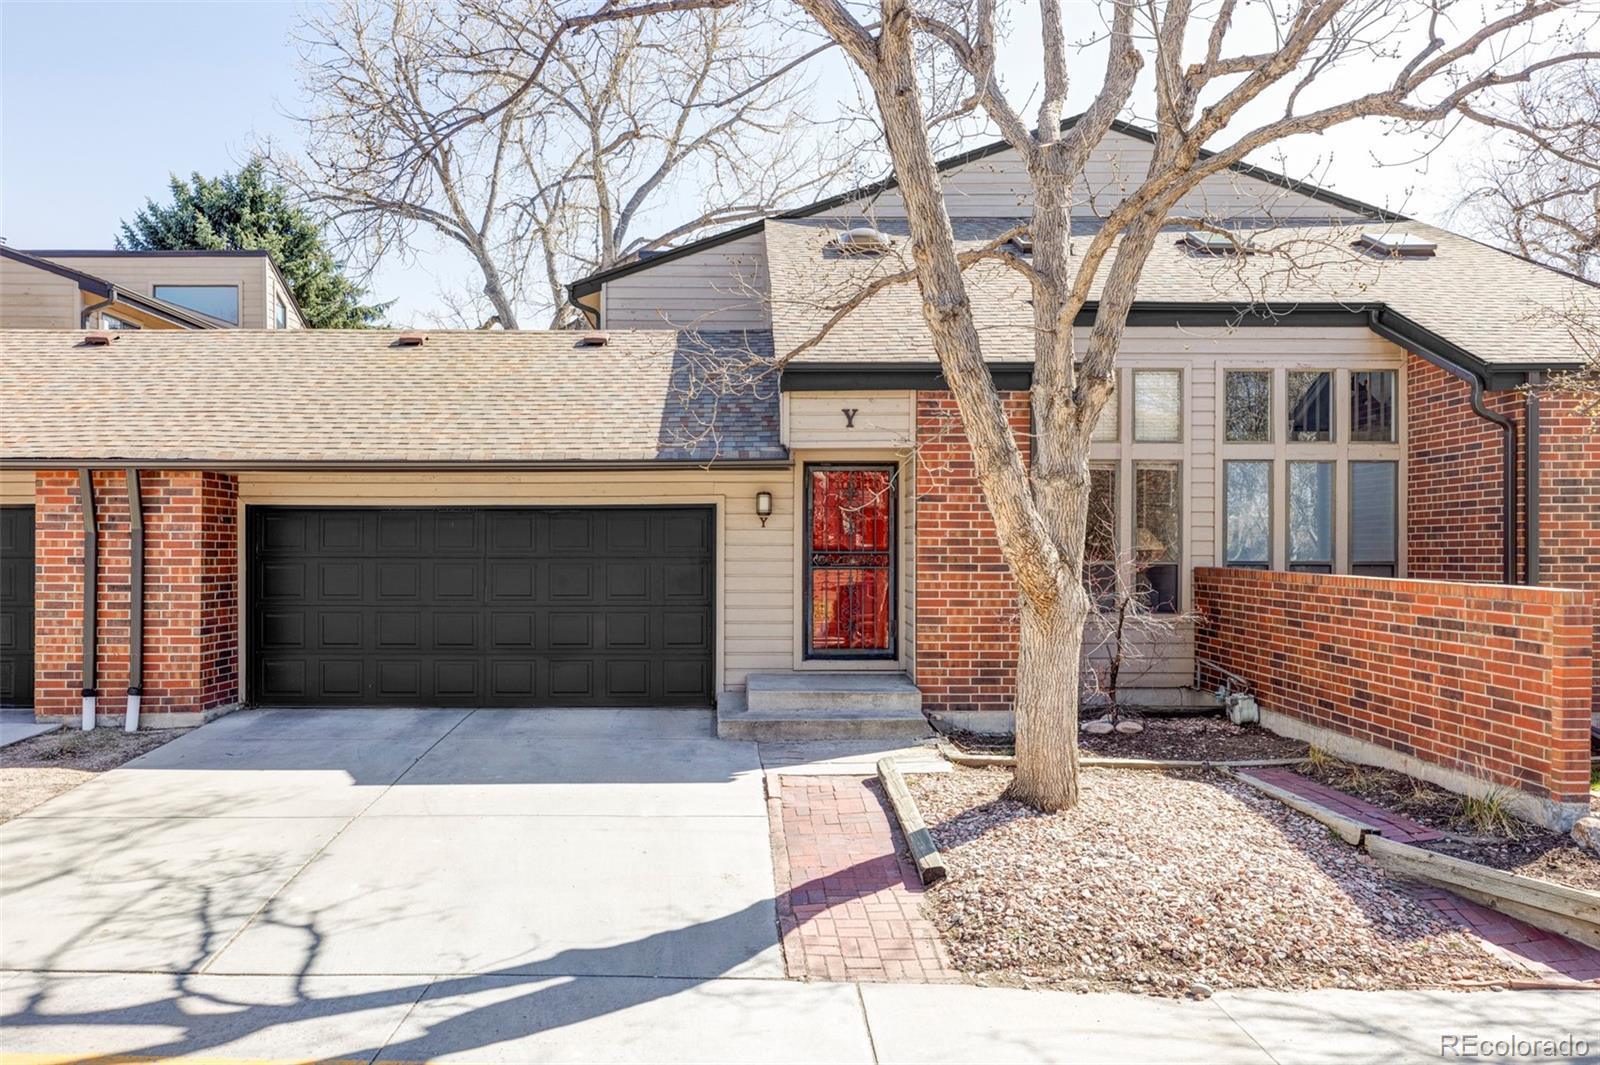 Photo one of 540 S Forest St # Y Denver CO 80246 | MLS 7851757